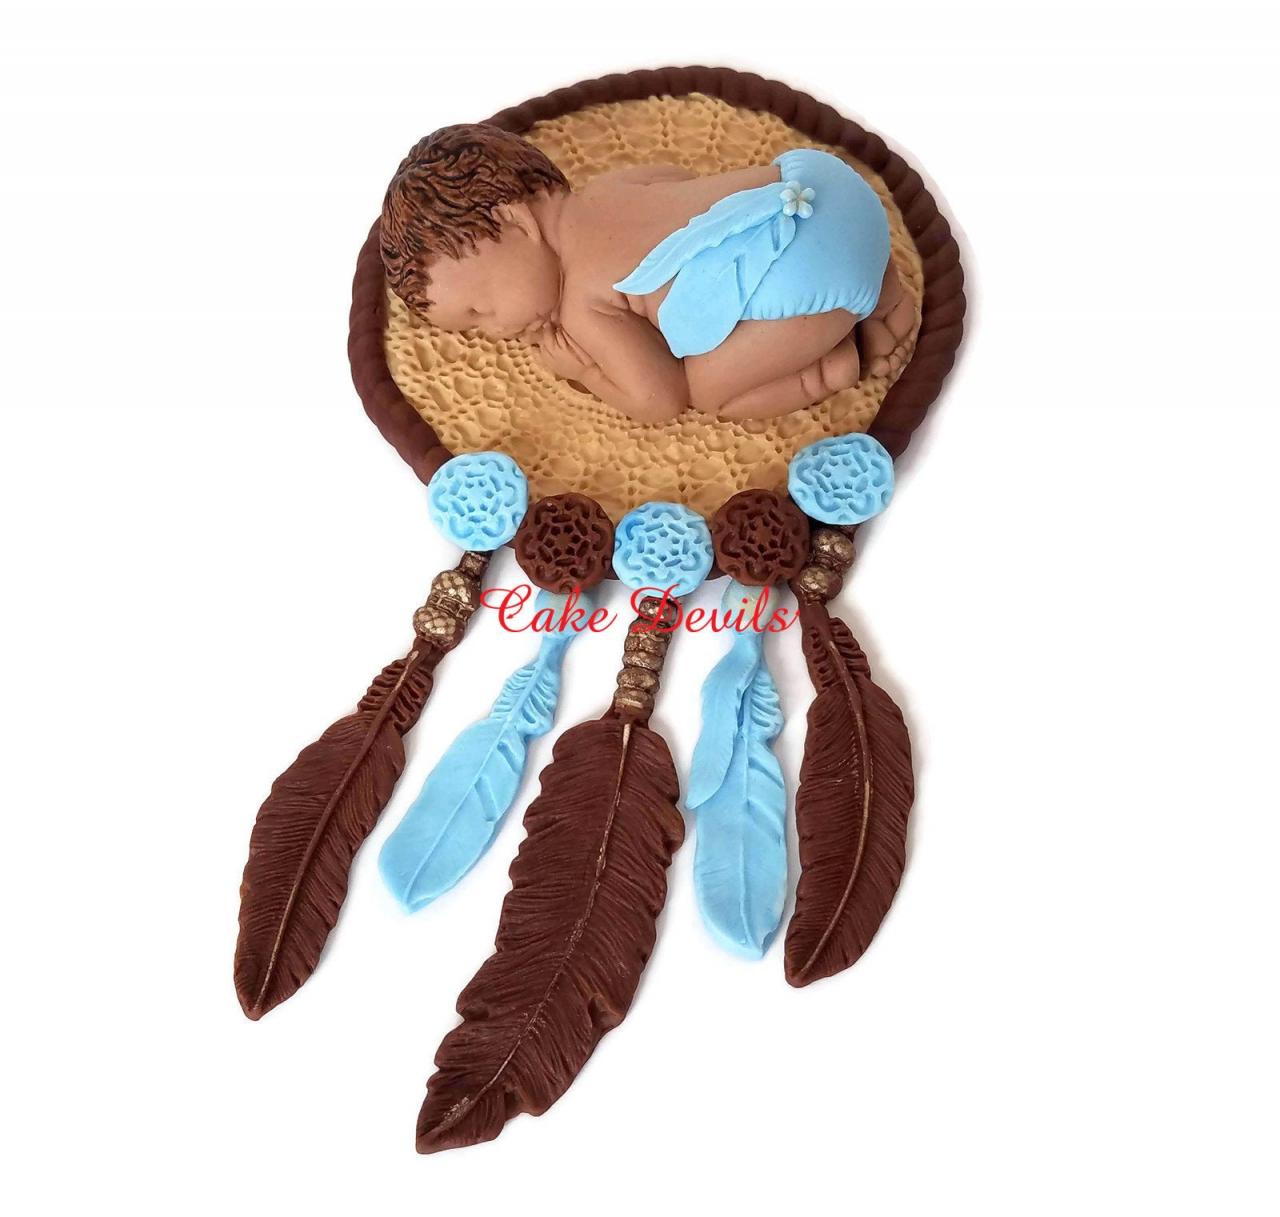 Bohemian Fondant Dream Catcher Cake Topper For Baby Shower, Tribal Sleeping Baby With Feathers, Handmade Edible Sugar Boho Cake Decorations